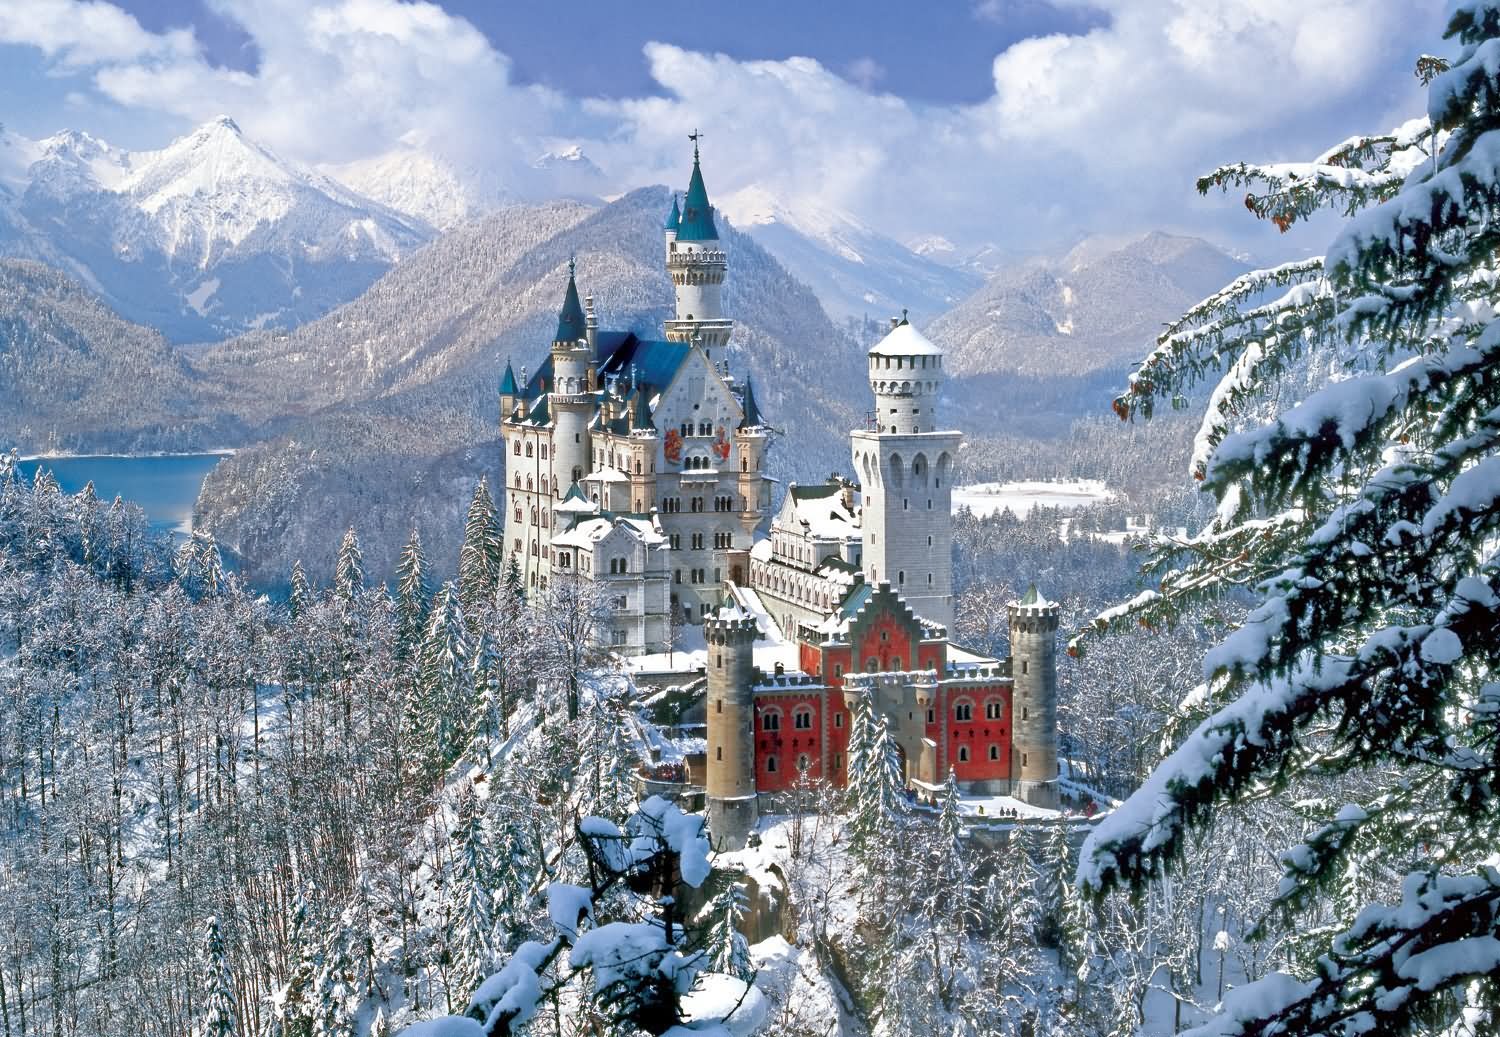 Amazing View Of The Neuschwanstein Castle Covered With Snow In Winters